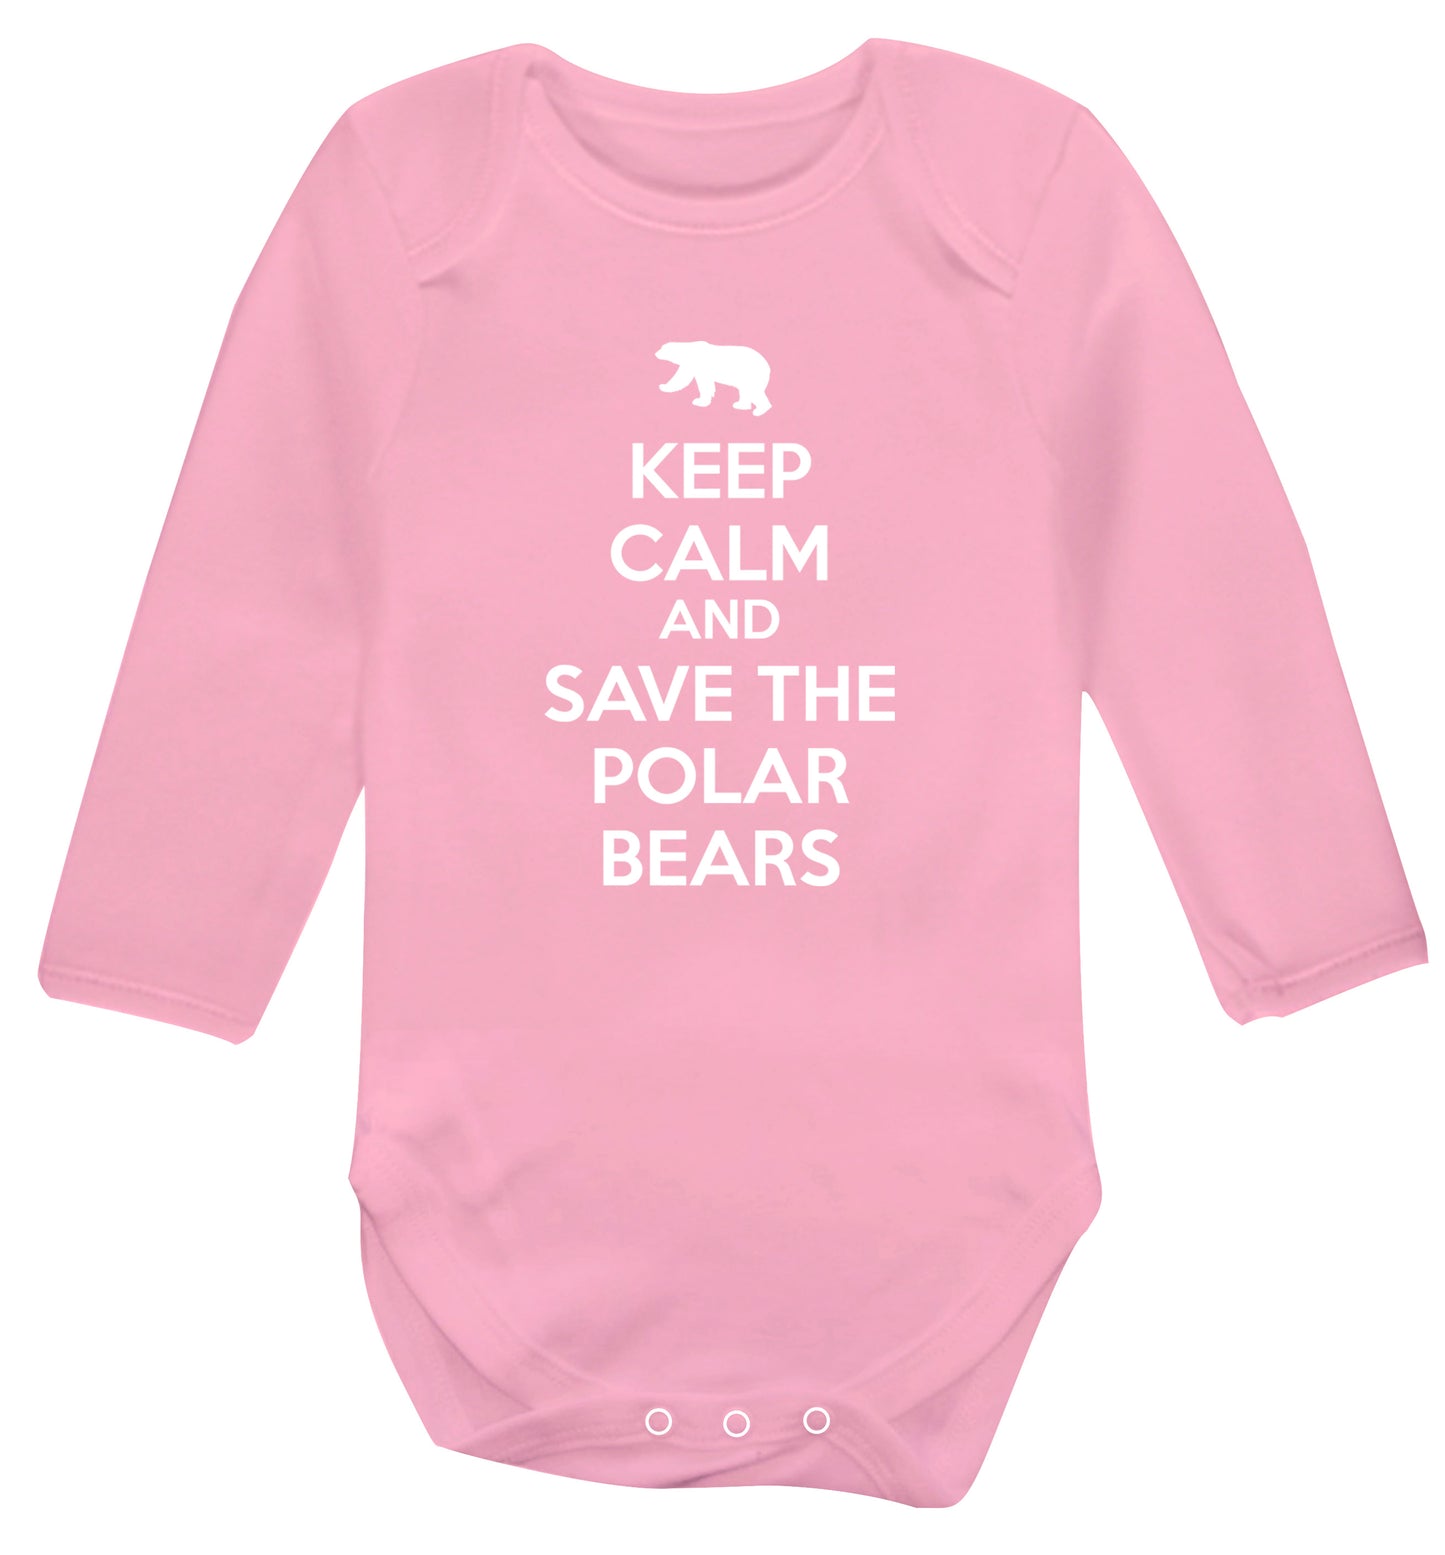 Keep calm and save the polar bears Baby Vest long sleeved pale pink 6-12 months